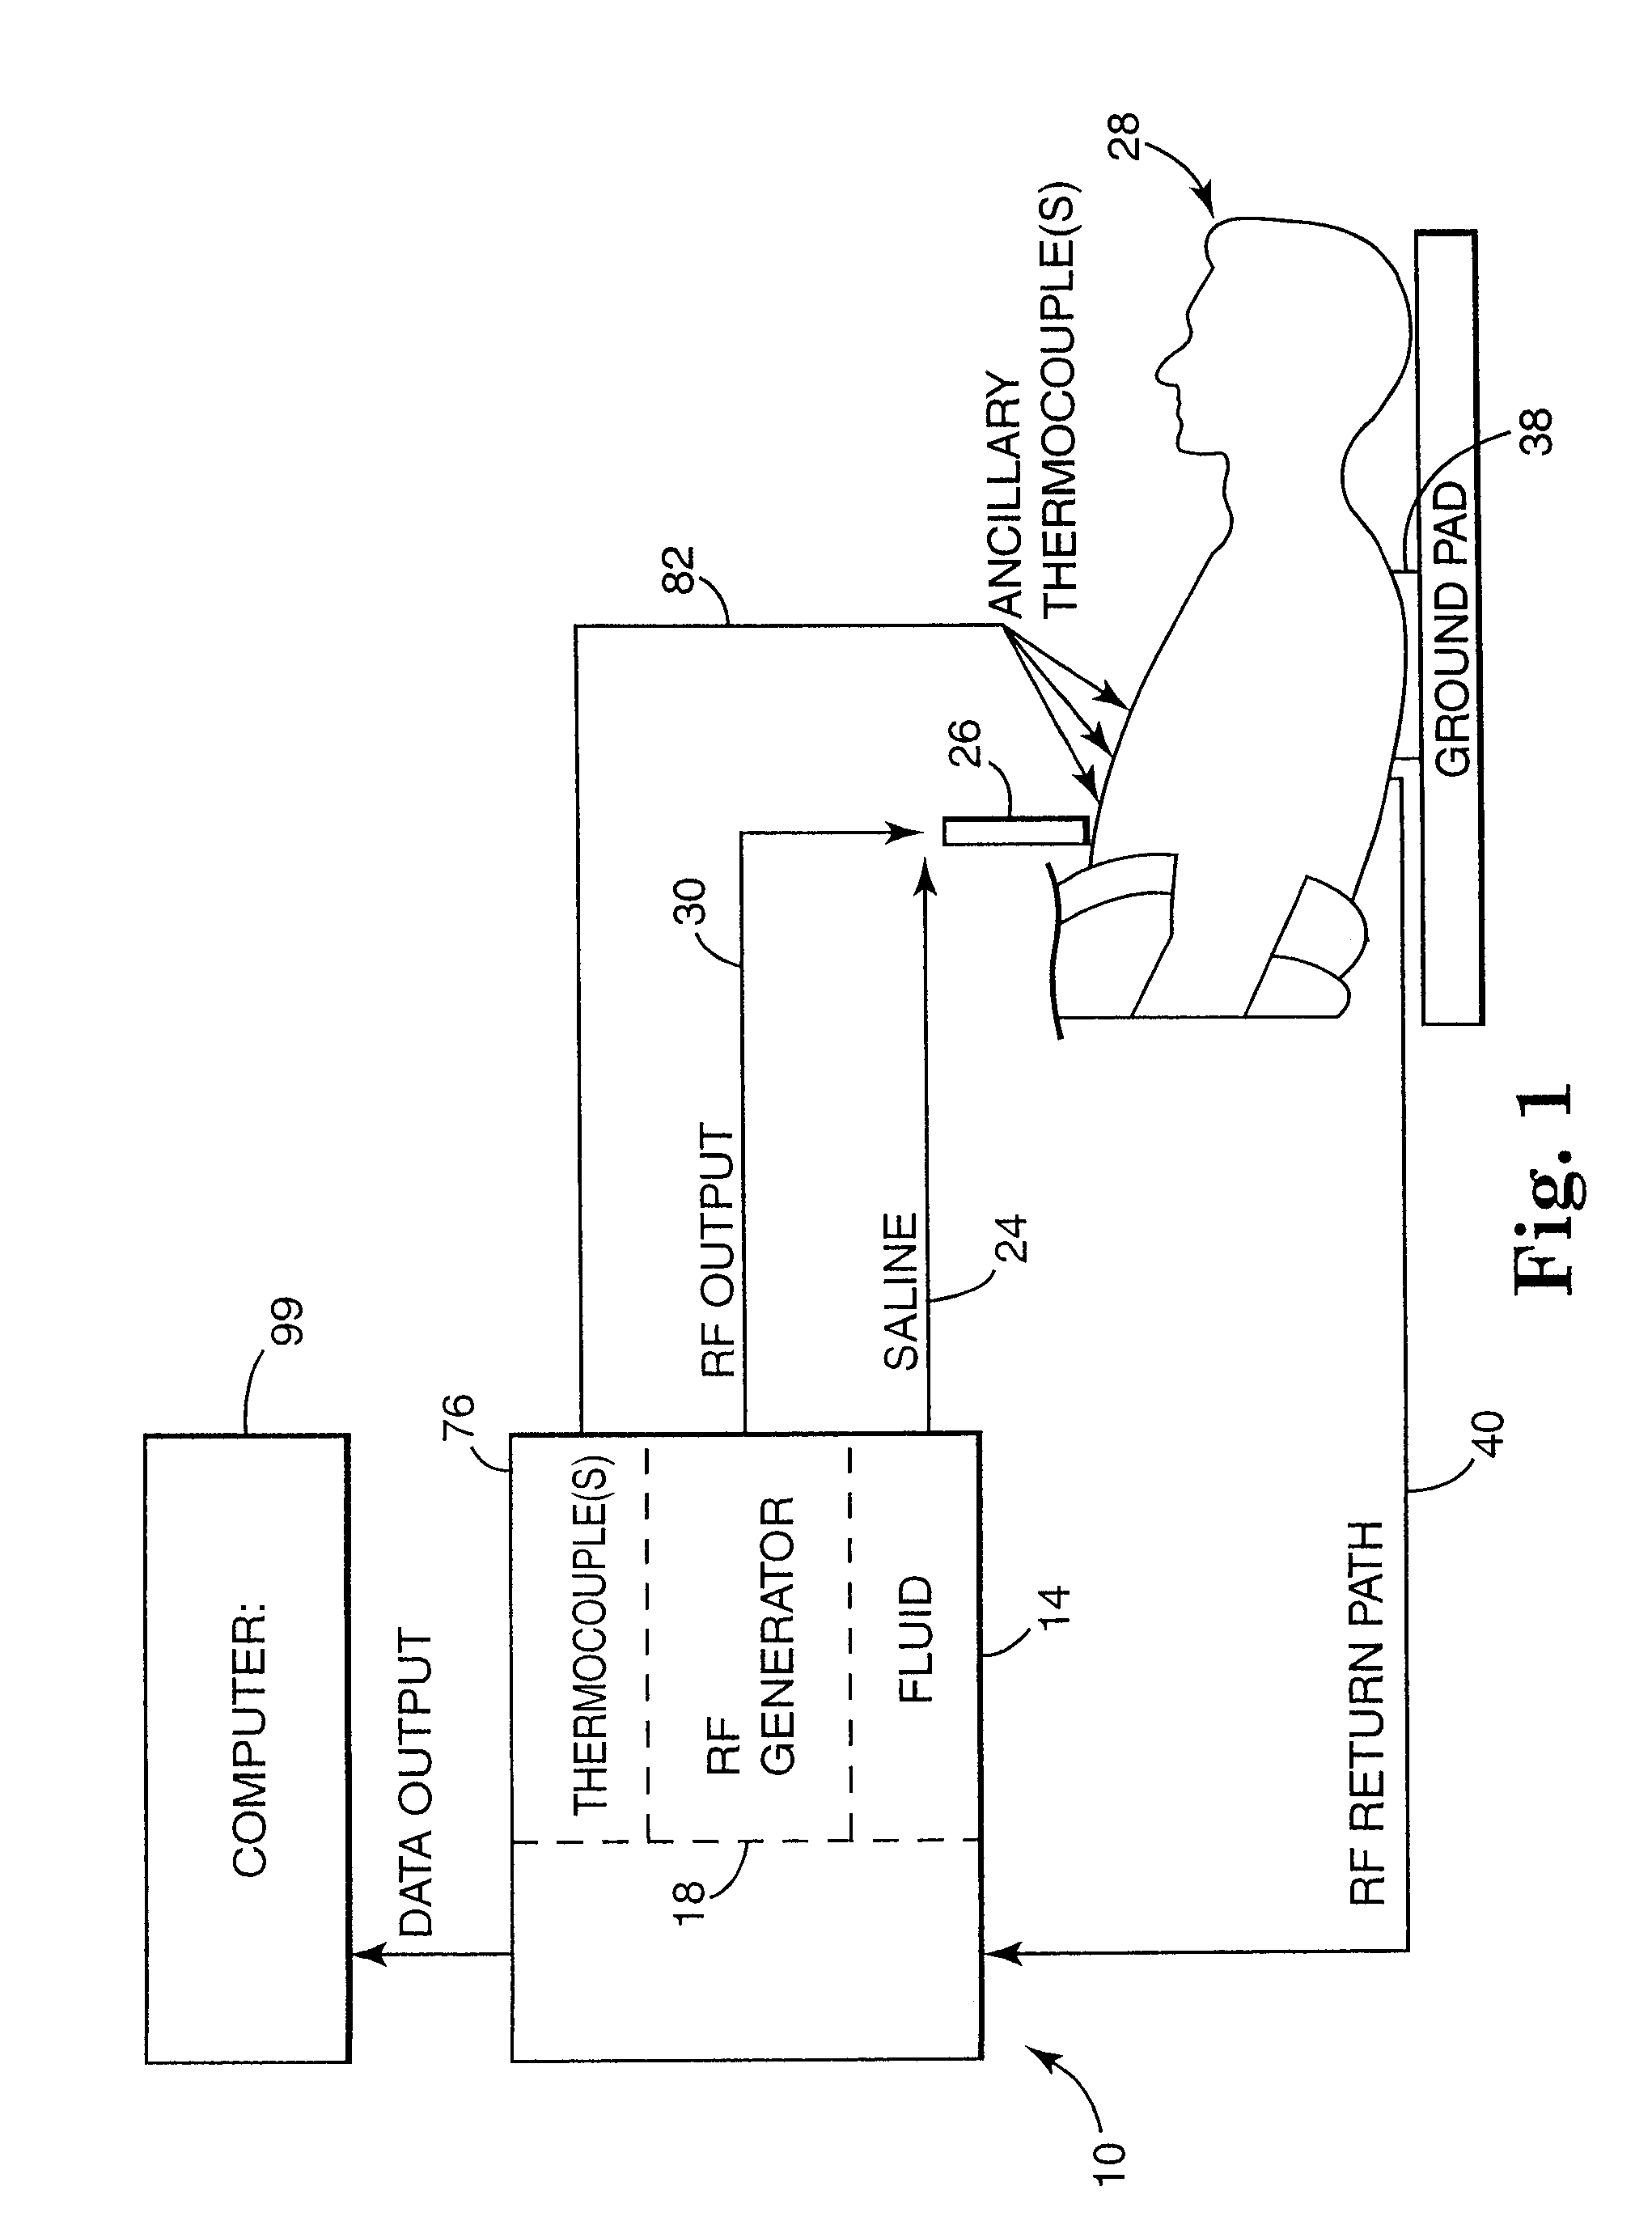 Apparatus and method for creating, maintaining, and controlling a virtual electrode used for the ablation of tissue